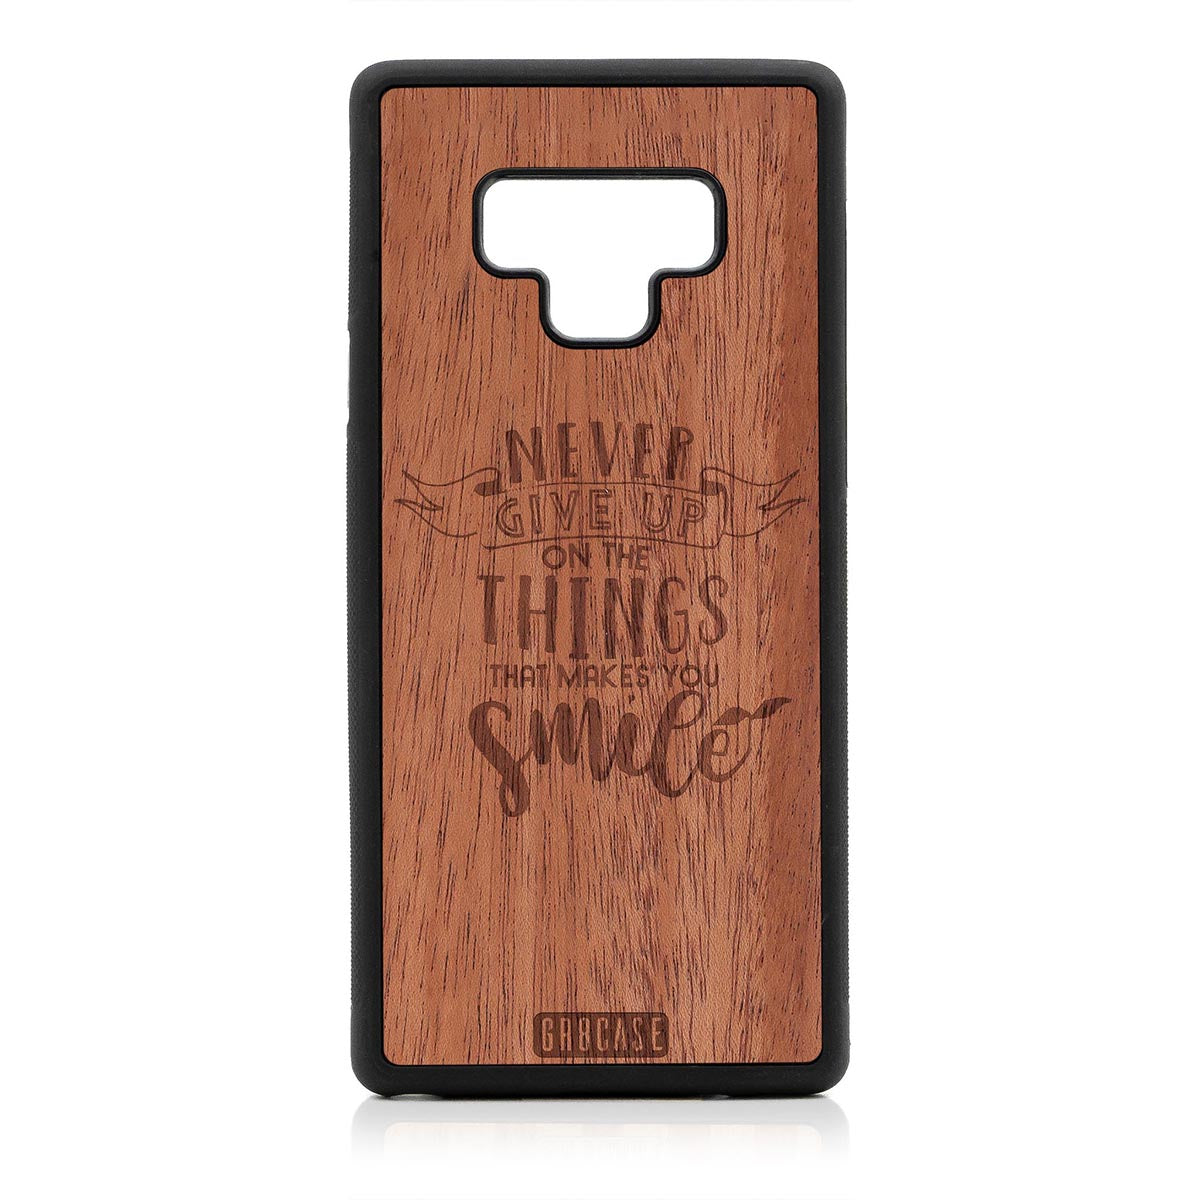 Never Give Up On The Things That Makes You Smile Design Wood Case Samsung Galaxy Note 9 by GR8CASE